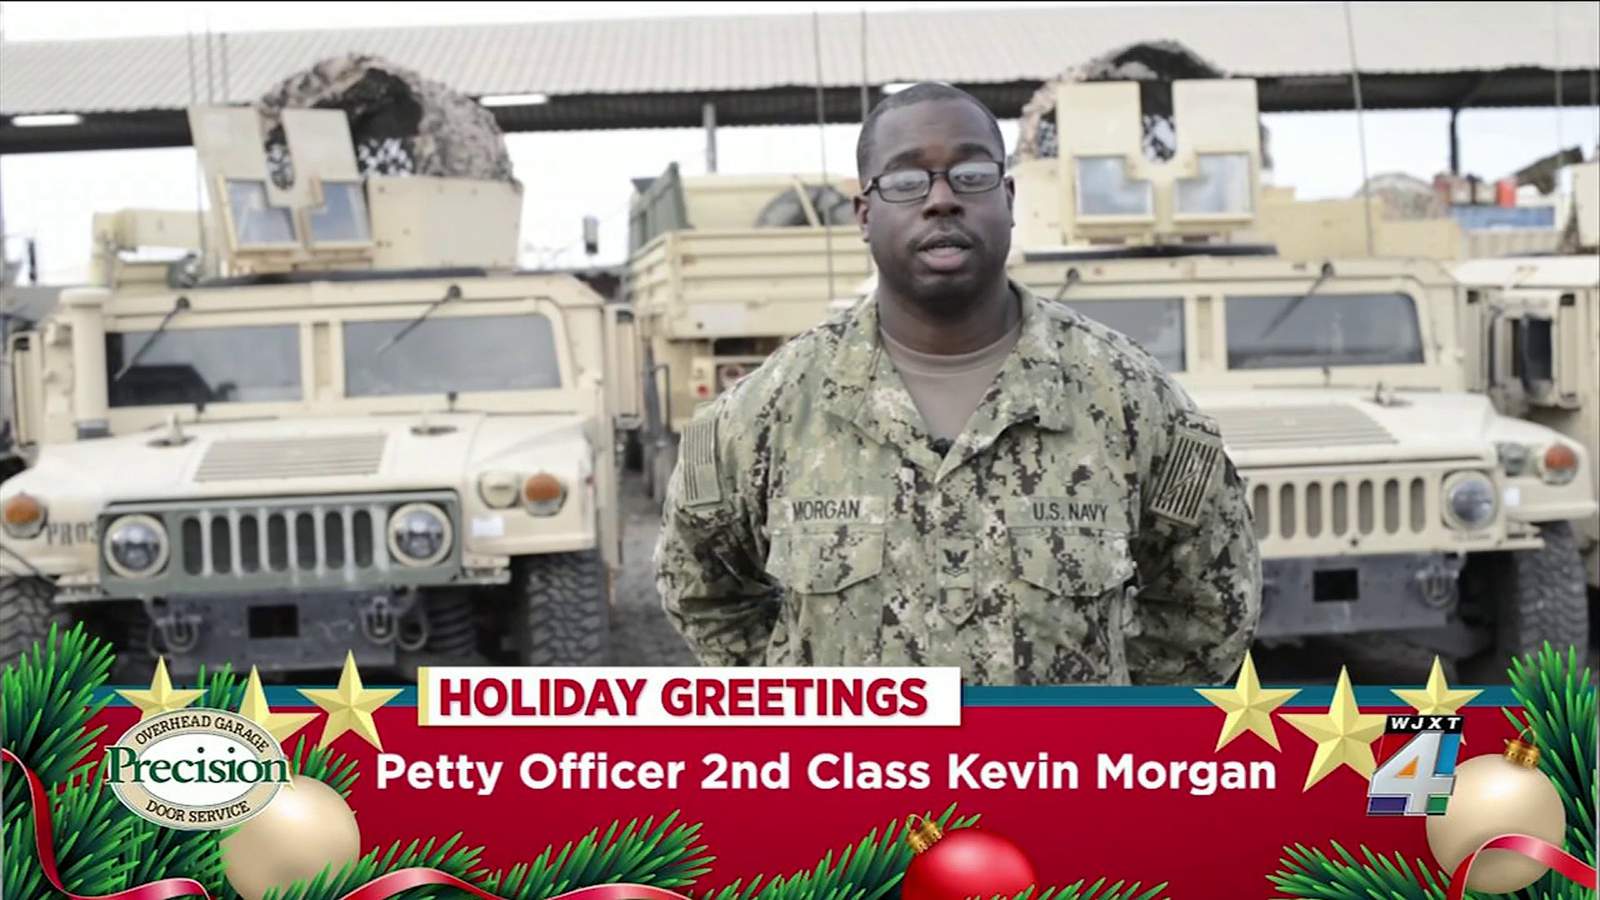 Petty Officer 2nd Class Kevin Morgan